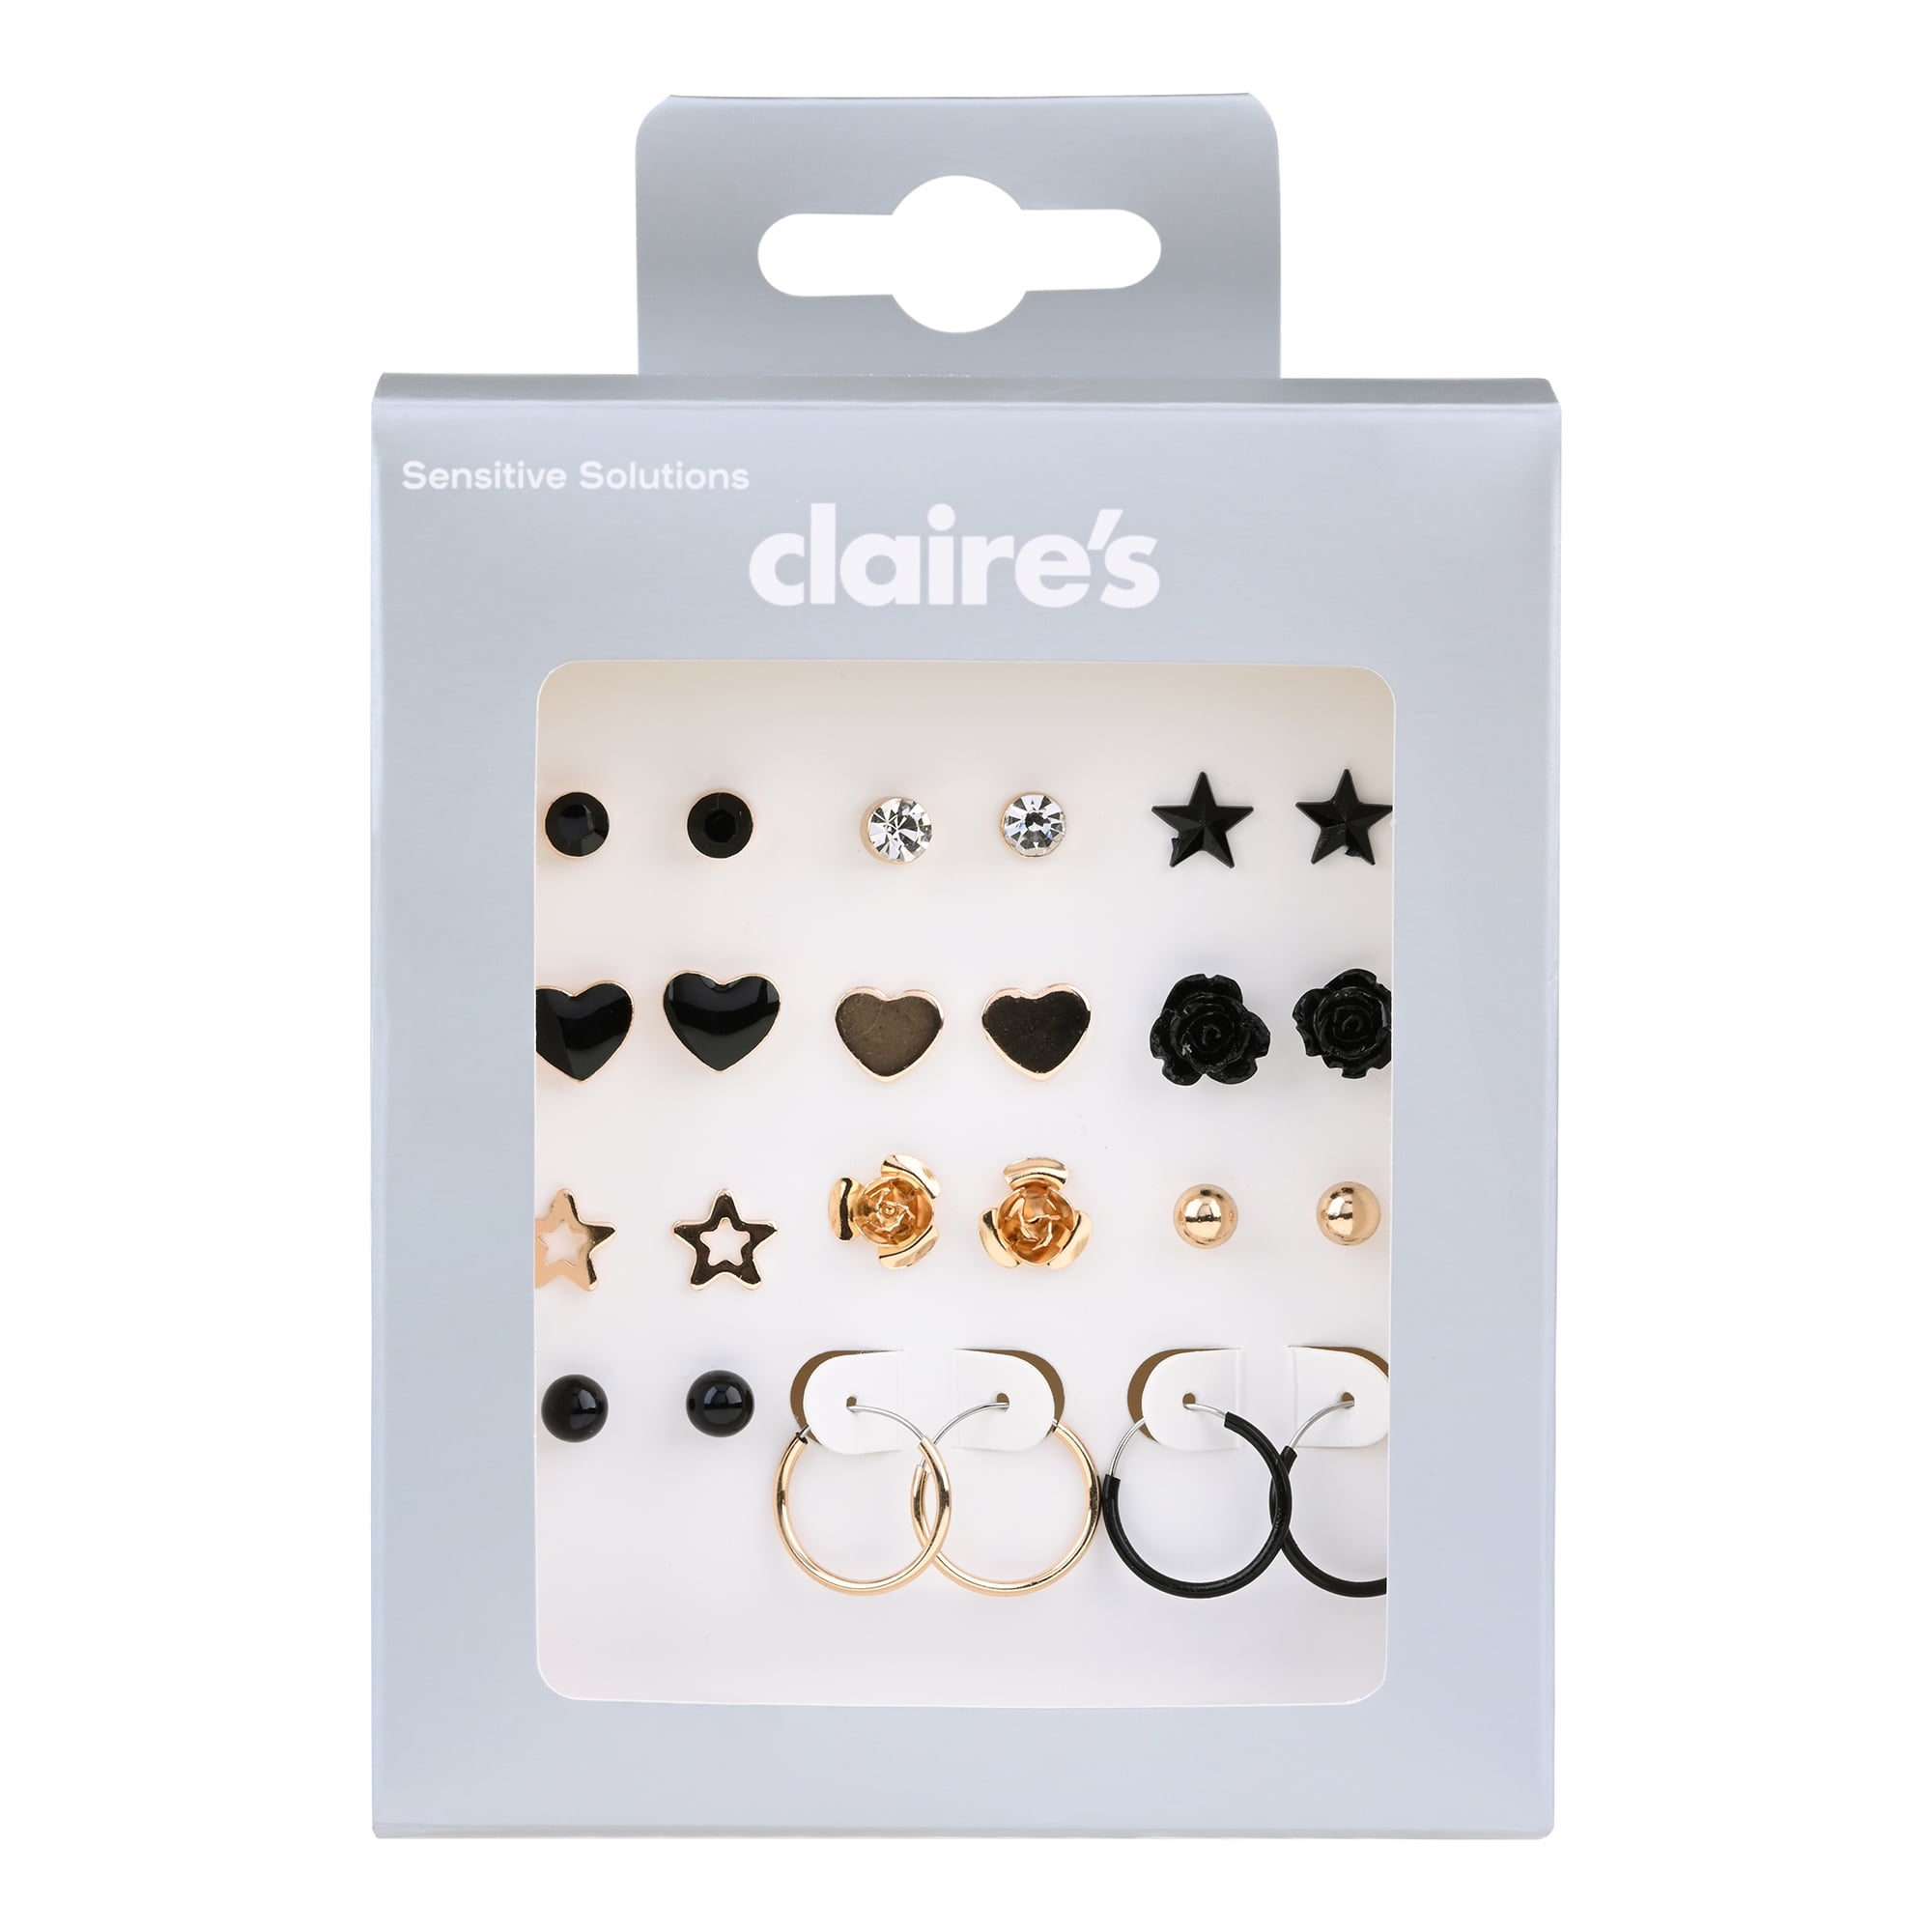 14kt White Gold 0.1 ct tw Laboratory Grown Diamond Studs Ear Piercing Kit  with Ear Care Solution | Claire's US